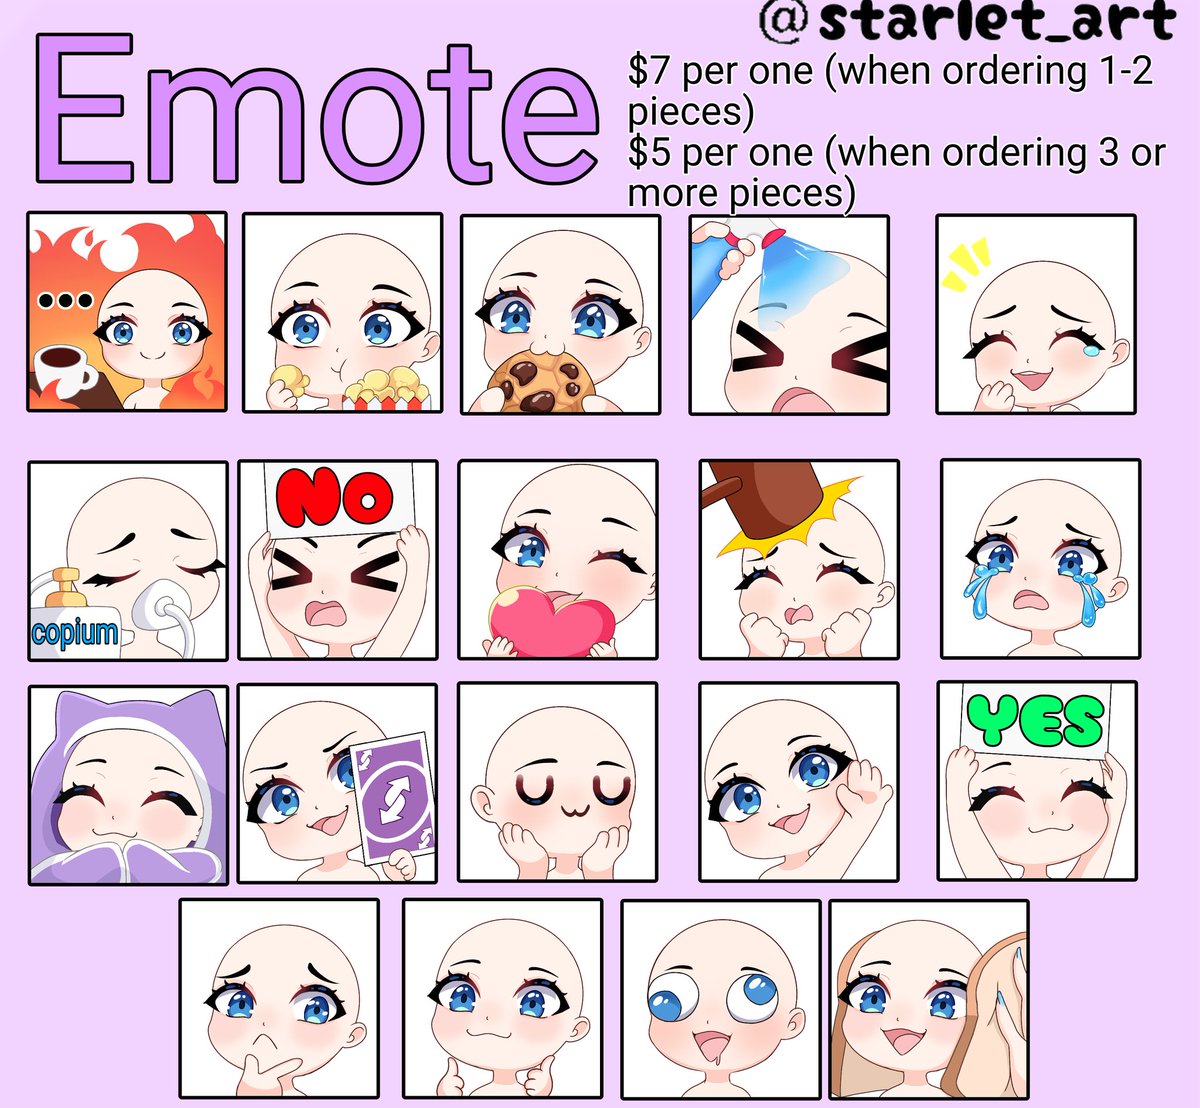 ☆QUICKLY ART RAFFLE!! ☆
to enter:
✧ like + RT 
✧ drop your OC/model in comments
500*500 px

You can also get this for 7$ or 5$.

End after 24 hours.
I will choose several winners
#Vtuber #artraffle #emotes